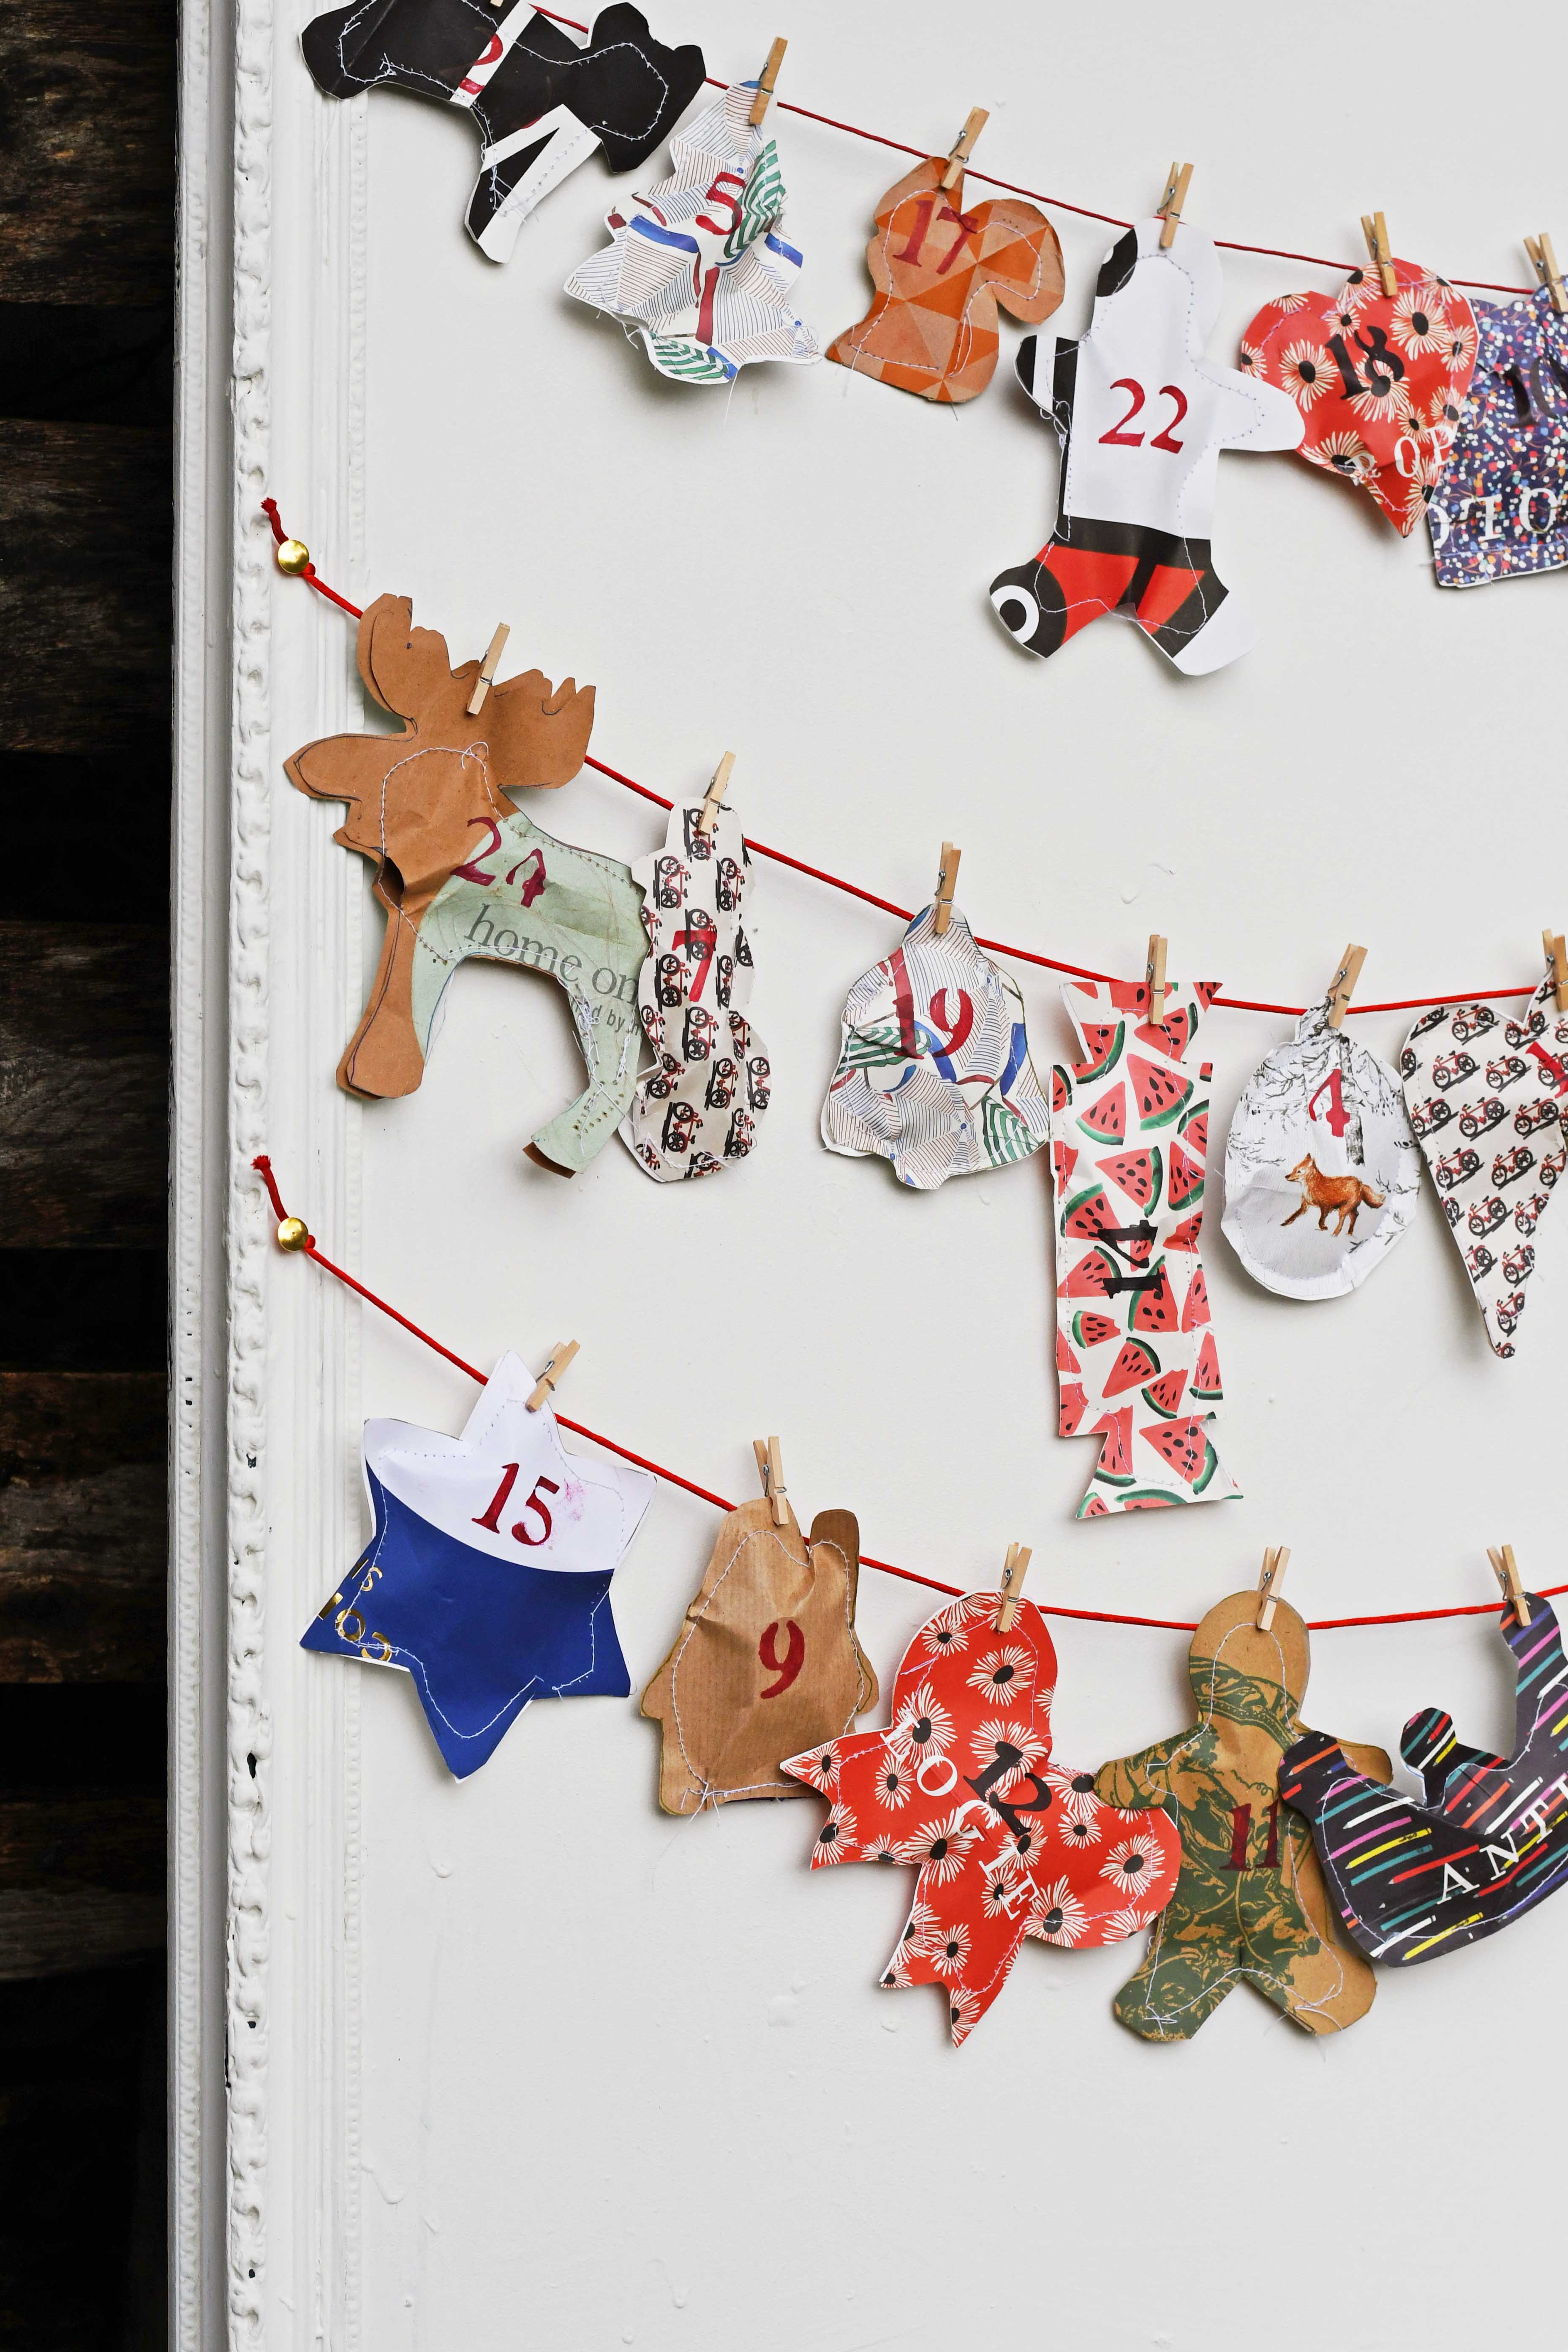 41 Easy Christmas Paper Crafts to Make for the Holidays: Repurposed paper bag advent calendar.